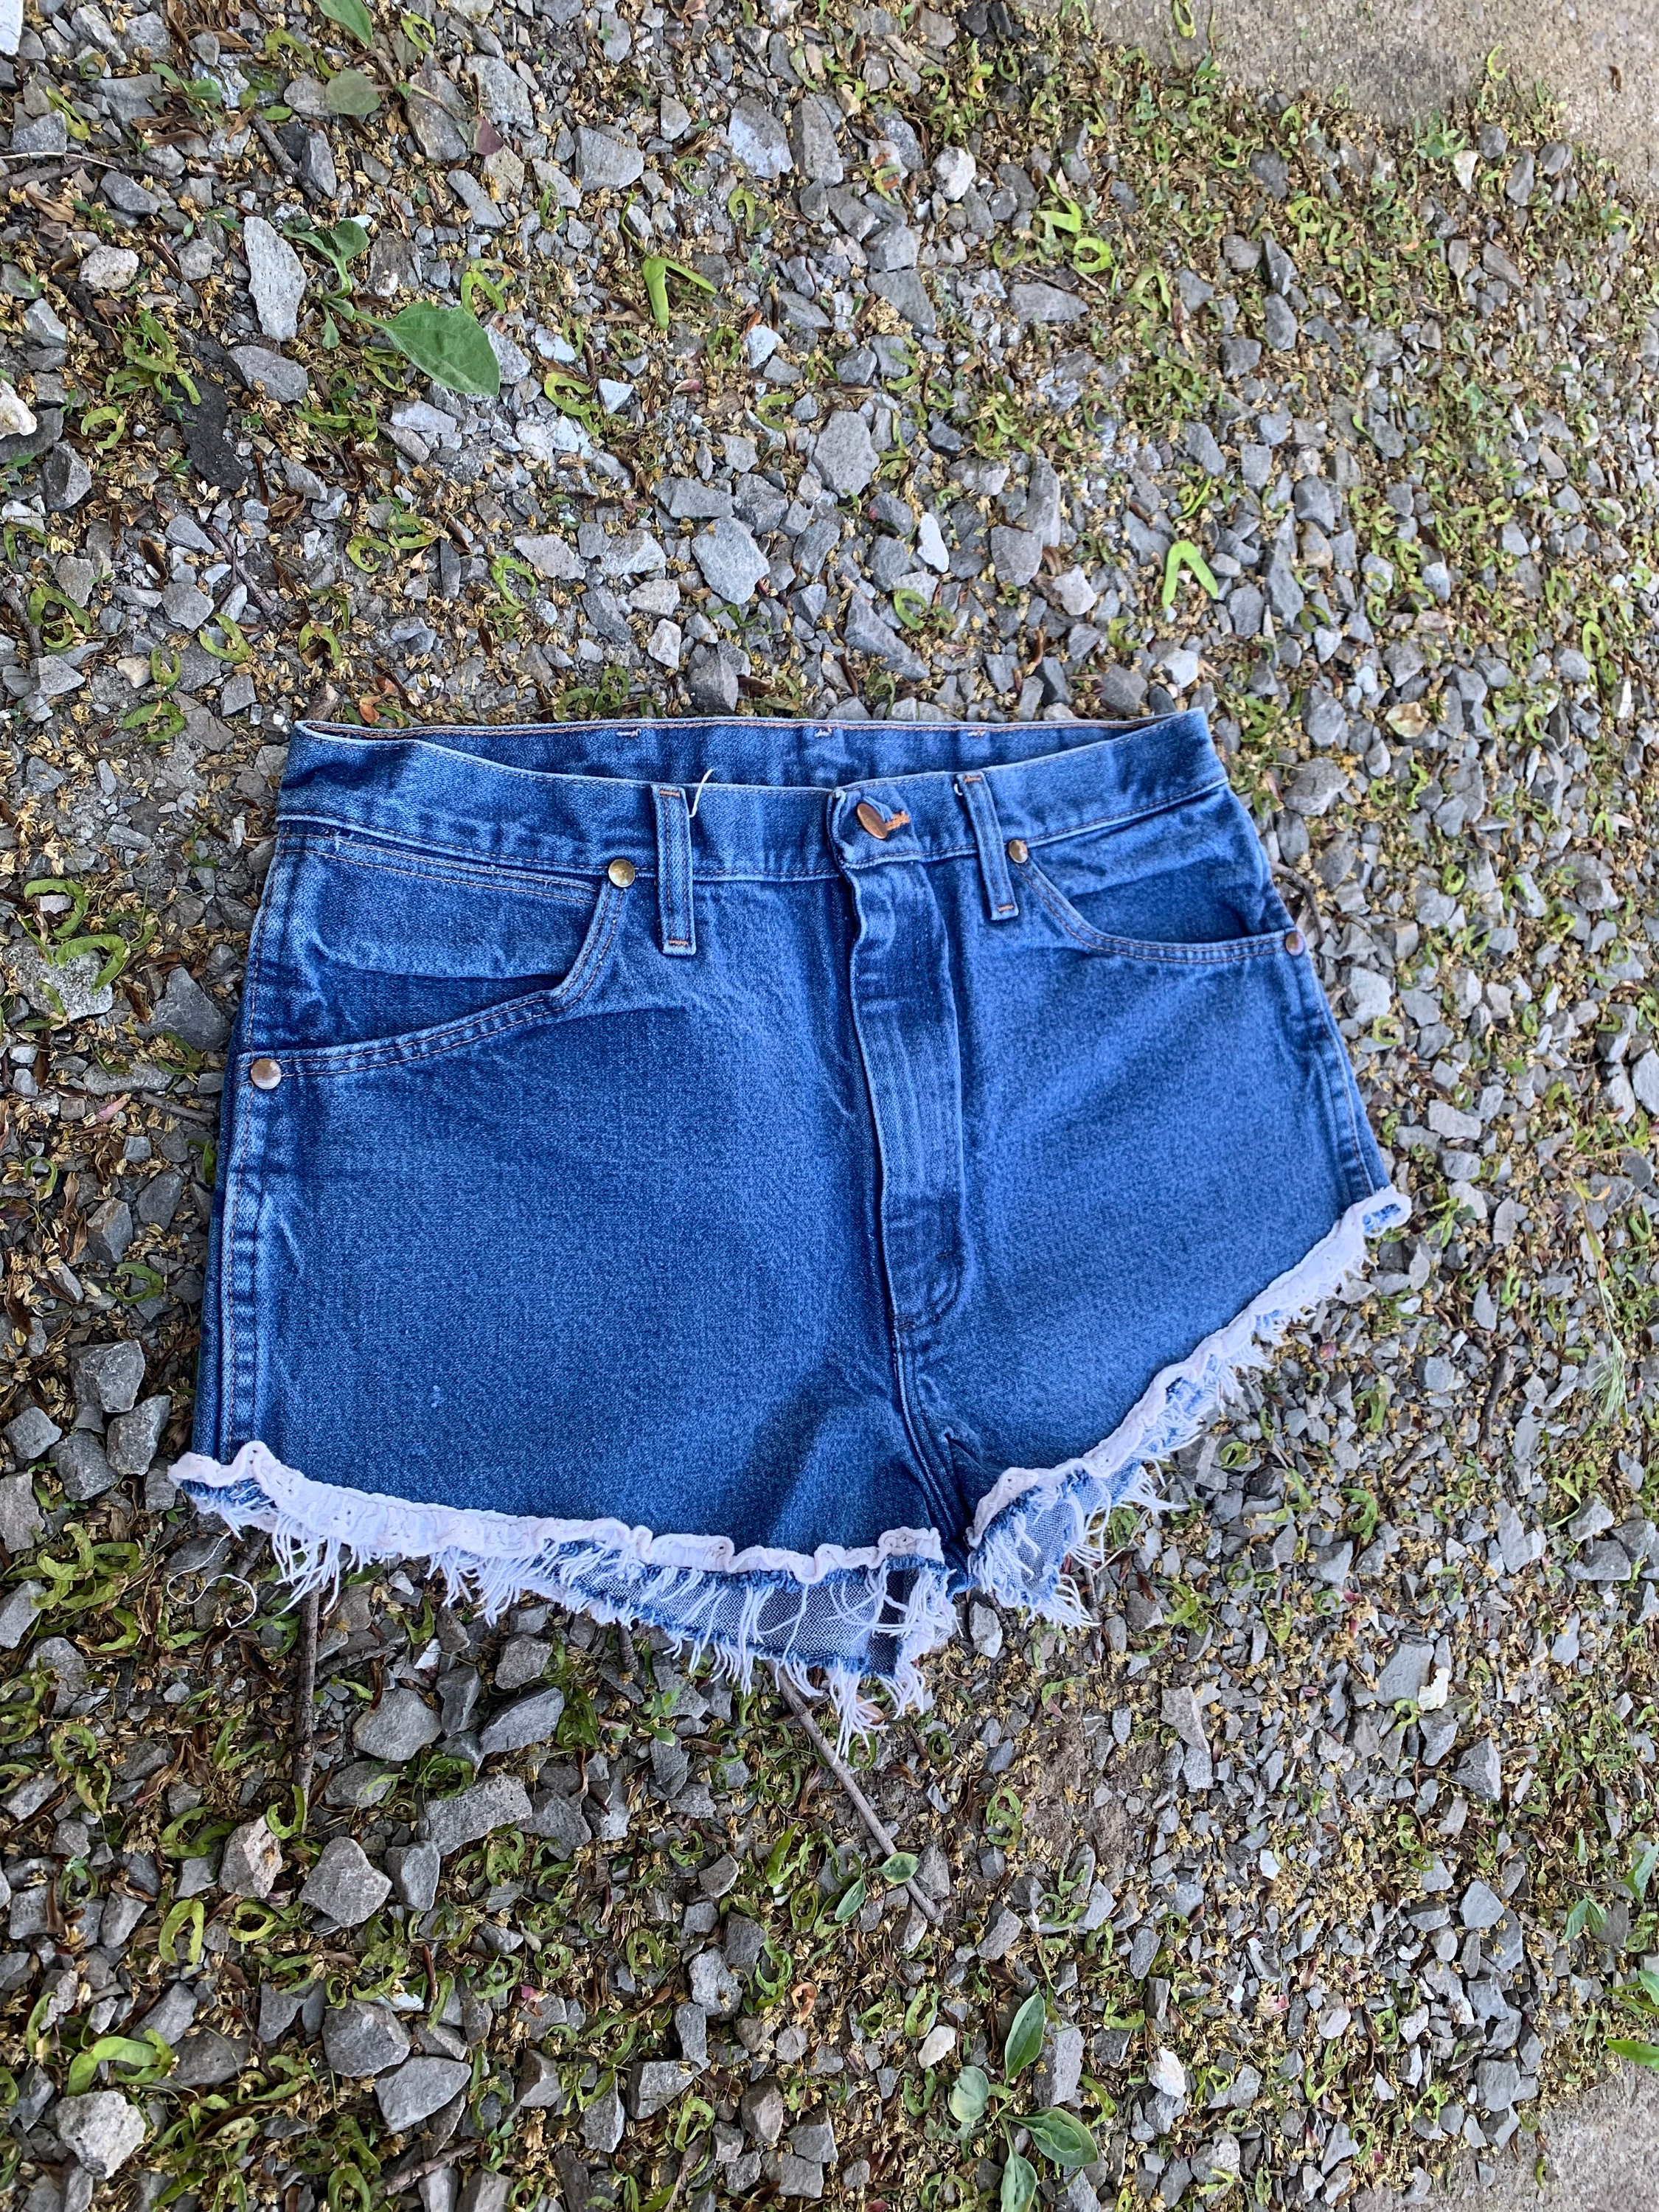 denim mini shorts for Fitness, Functionality and Style 